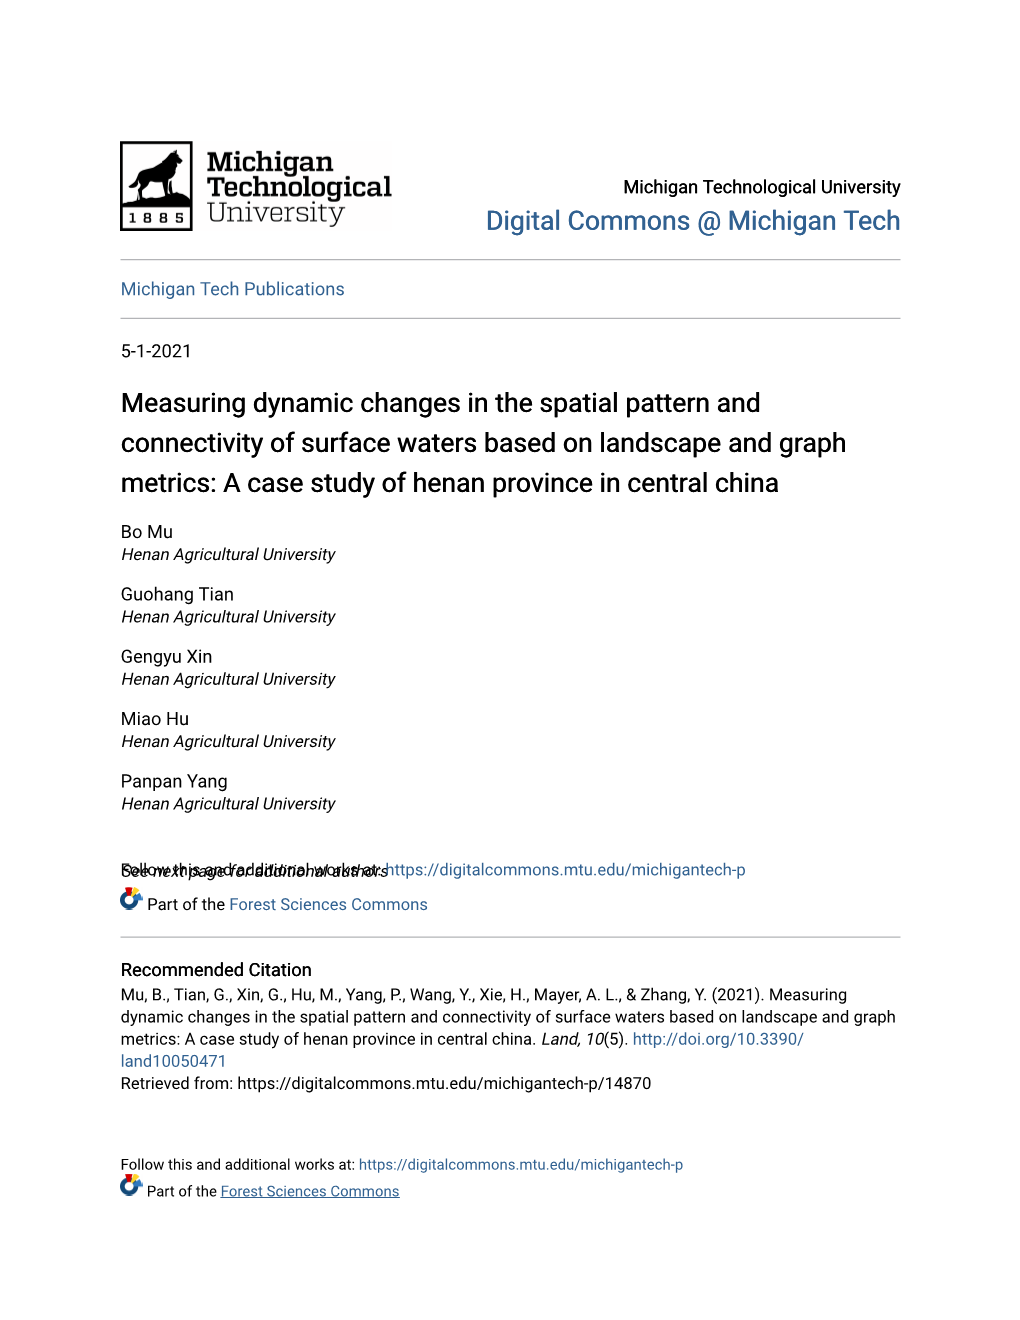 Measuring Dynamic Changes in the Spatial Pattern and Connectivity Of